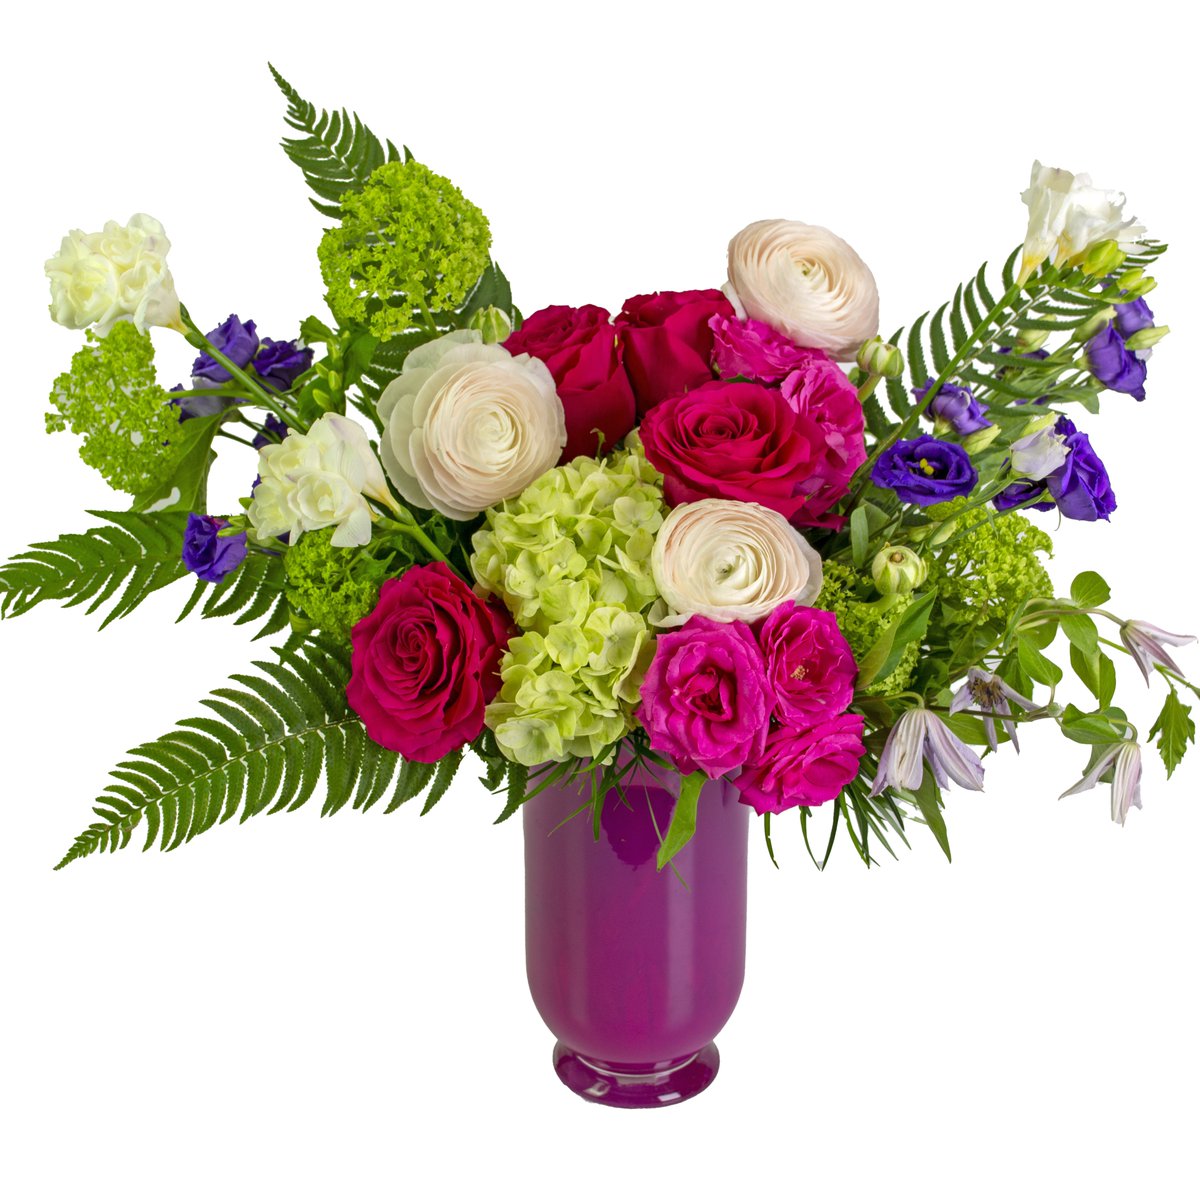 Countdown to Mother's Day continues... The Lavish Splendor Bouquet features ranunculus, freesia + hydrangea in pinks, purple + white in a tall pink Polish glass vase. Order today: karinsflorist.com/.../lavish-spl… Don't forget Teacher + Nurse Appreciation Weeks next week too! #MothersDay